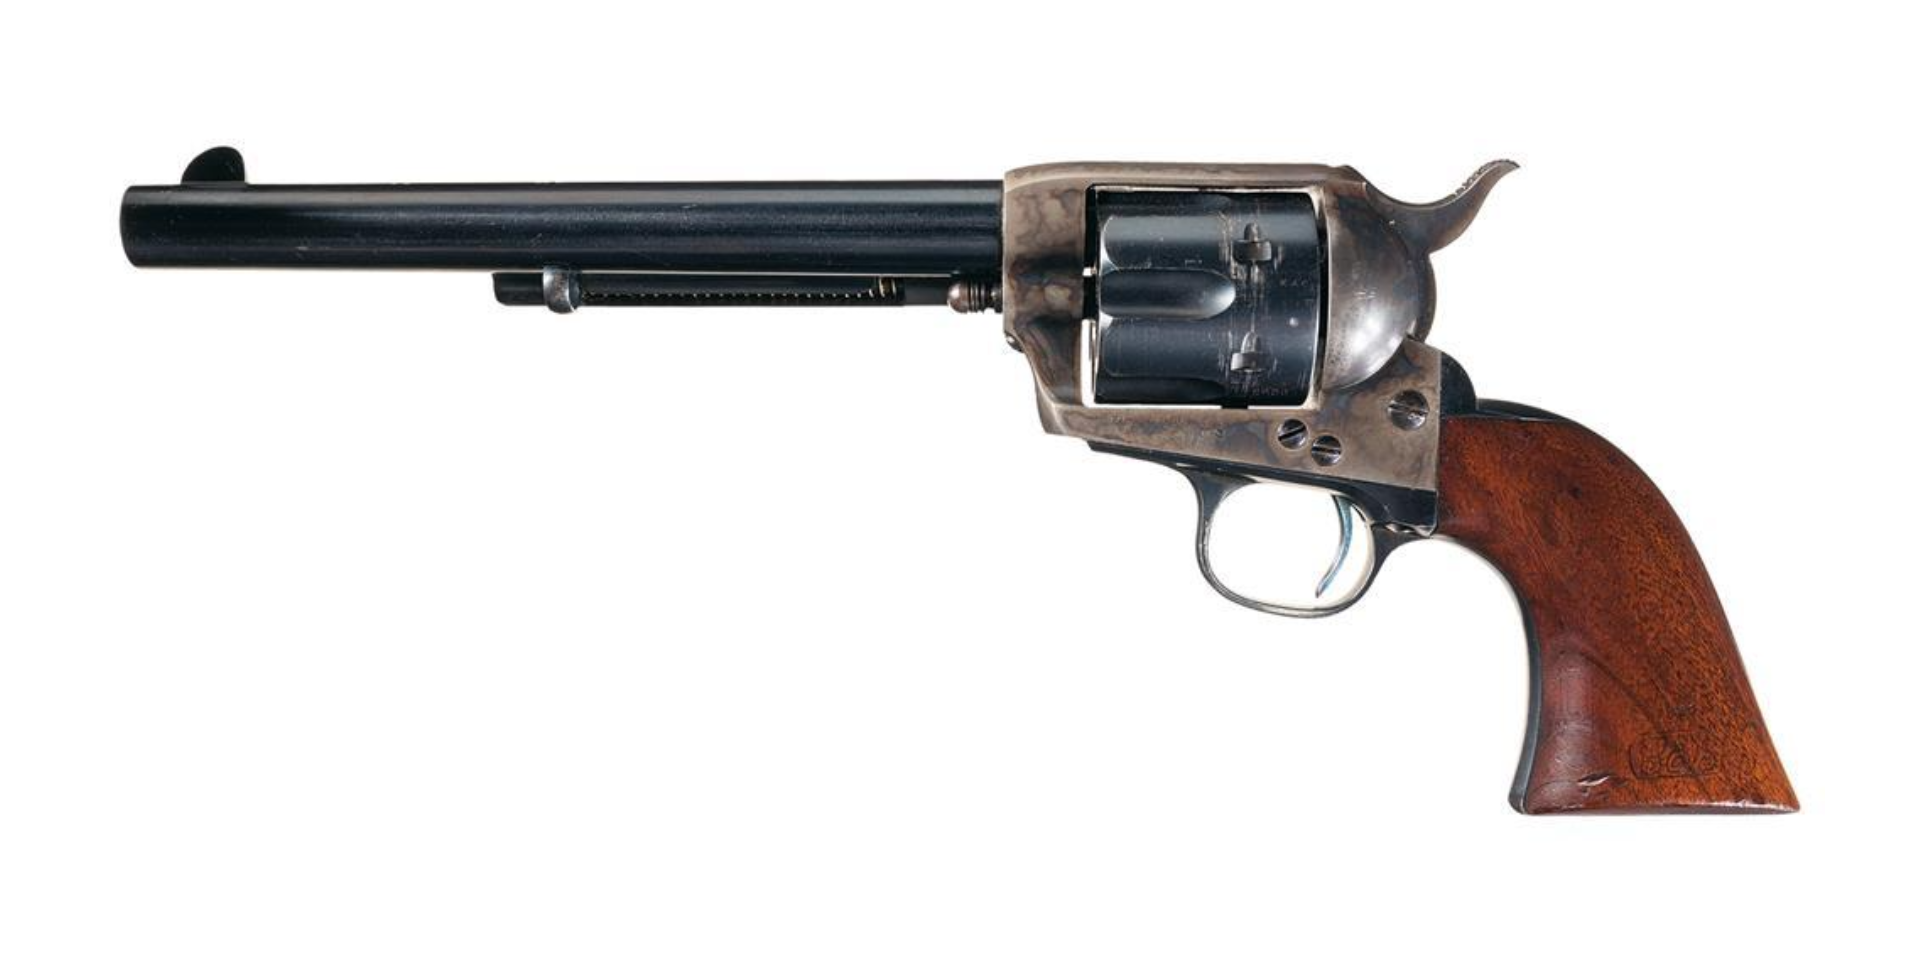 Guns in movies: Colt Single Action Army in 45 LC.